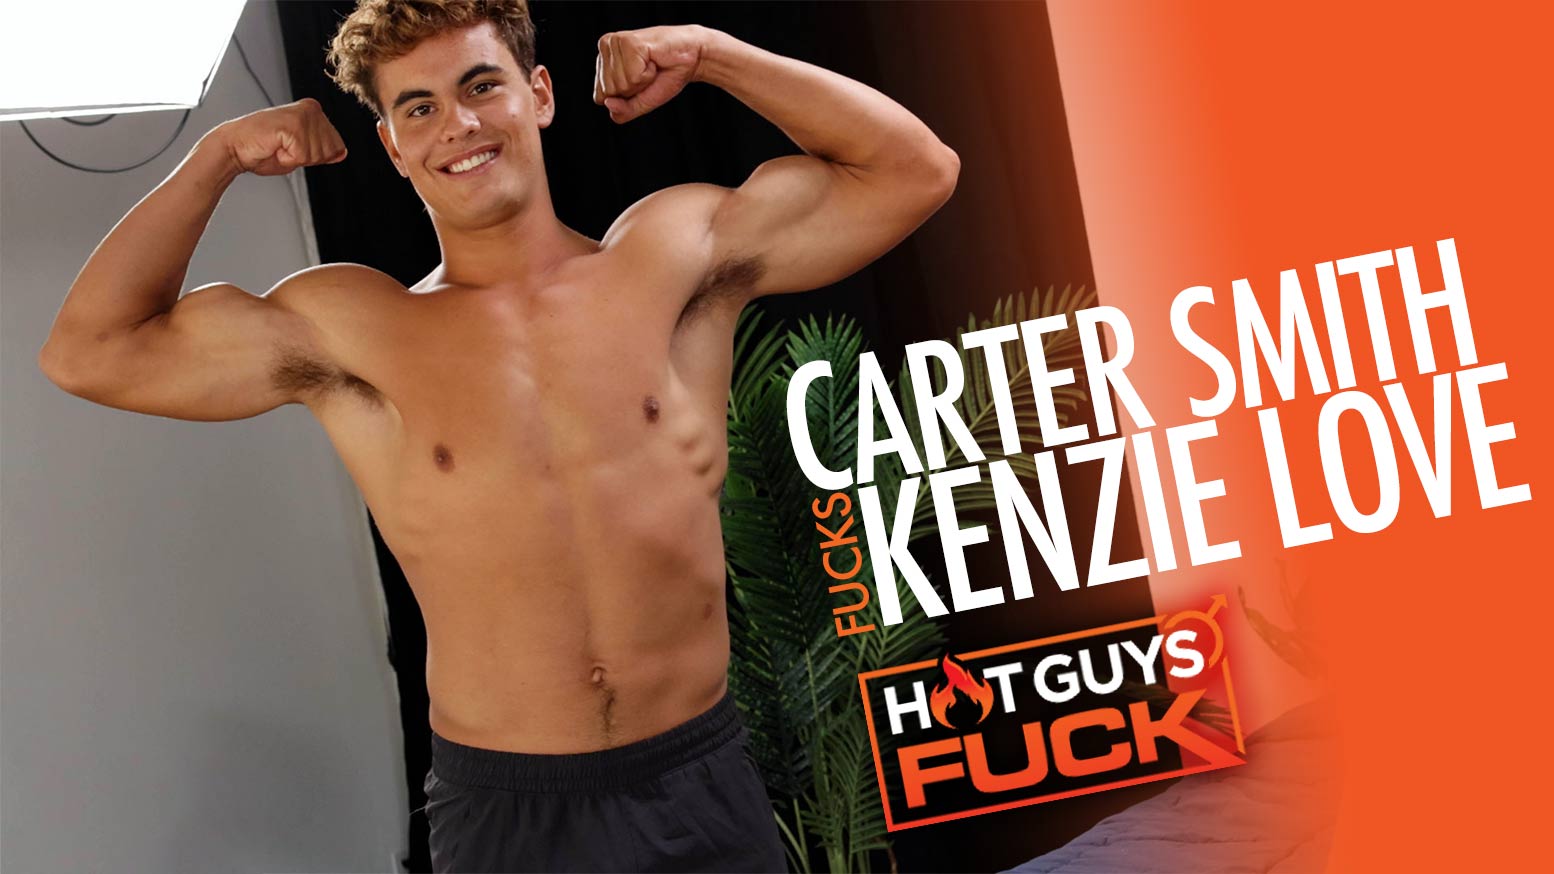 New Exclusive Muscle STUD Carter Smith Joins HGF To Be Pleased By Kenzie Love